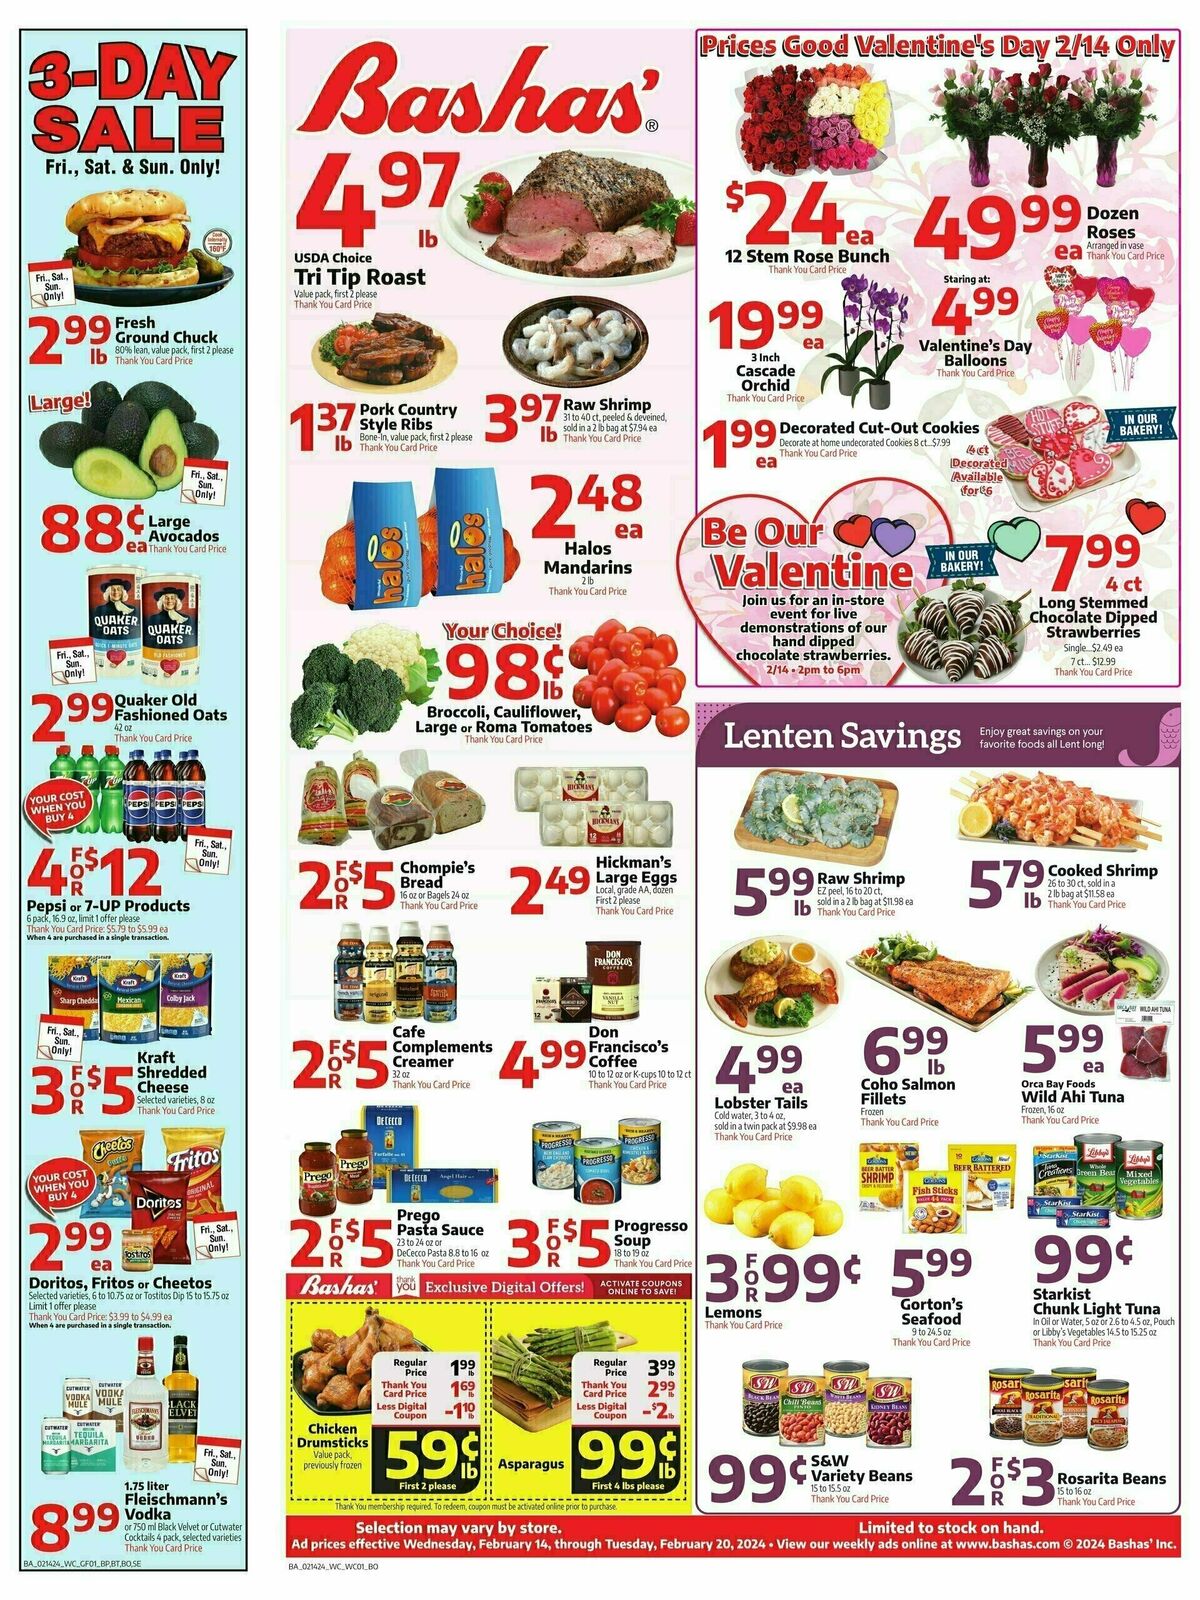 Bashas Weekly Ad from February 14